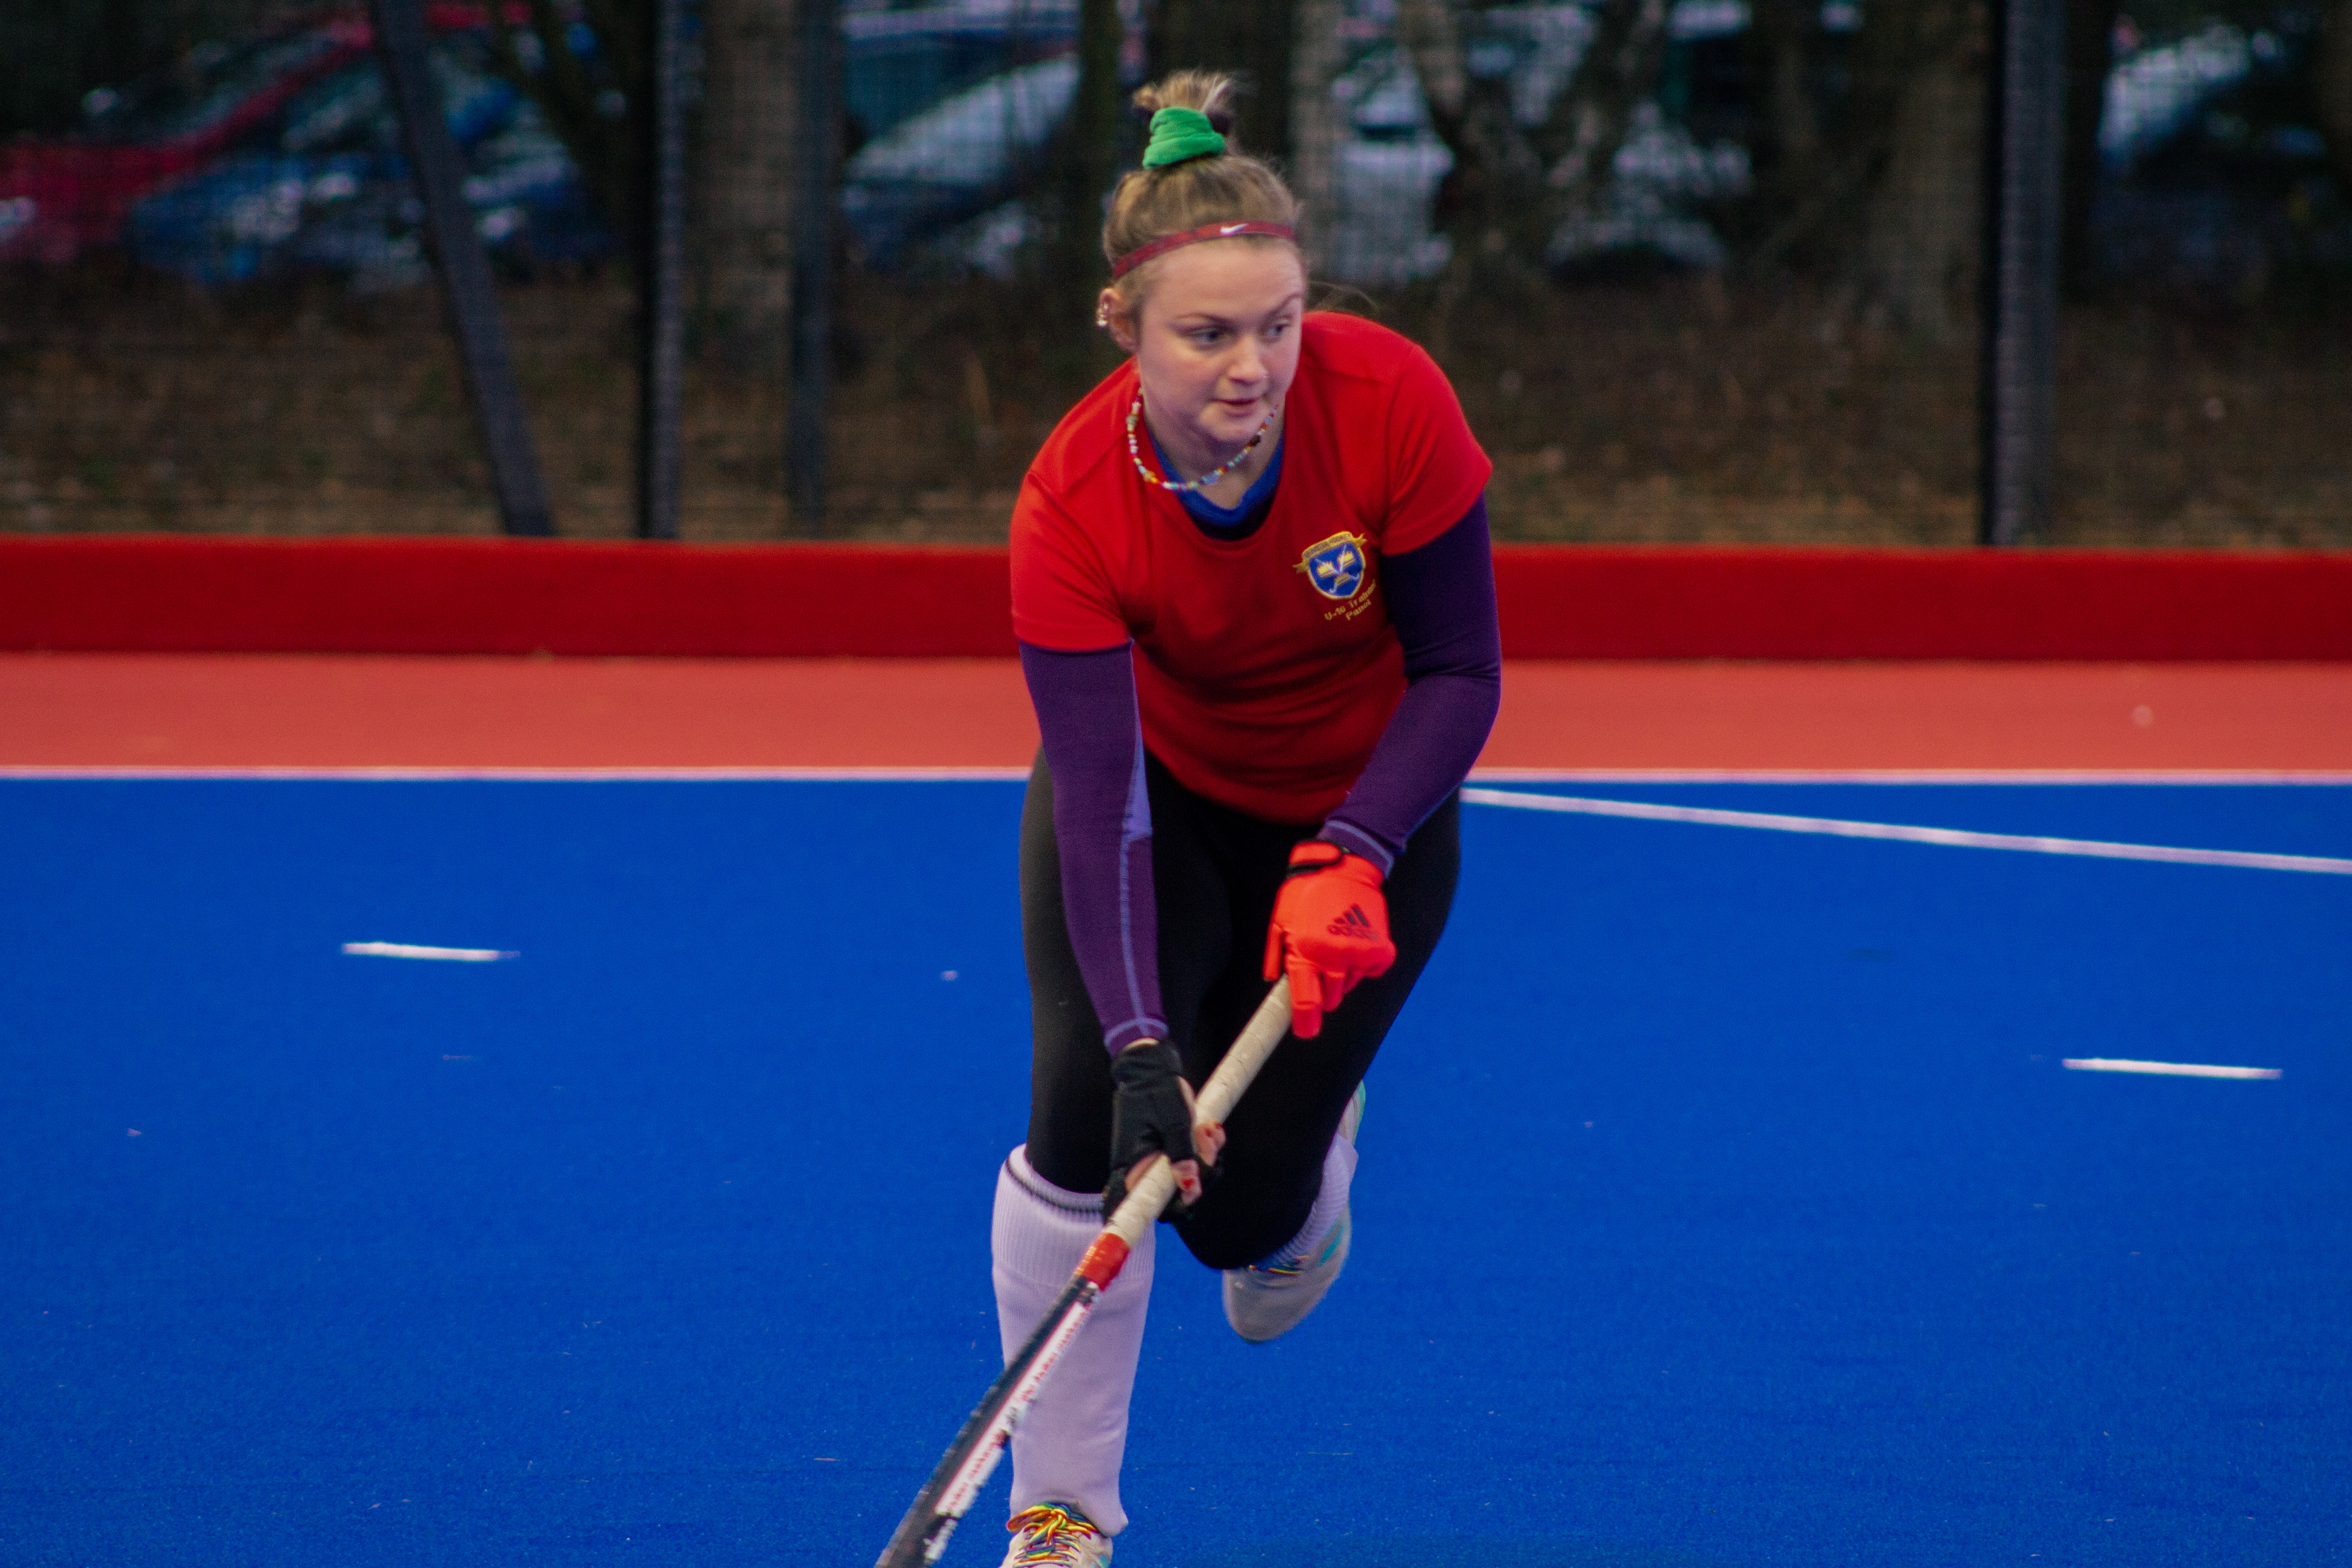 Woman in a red t-shirt in action playing hockey